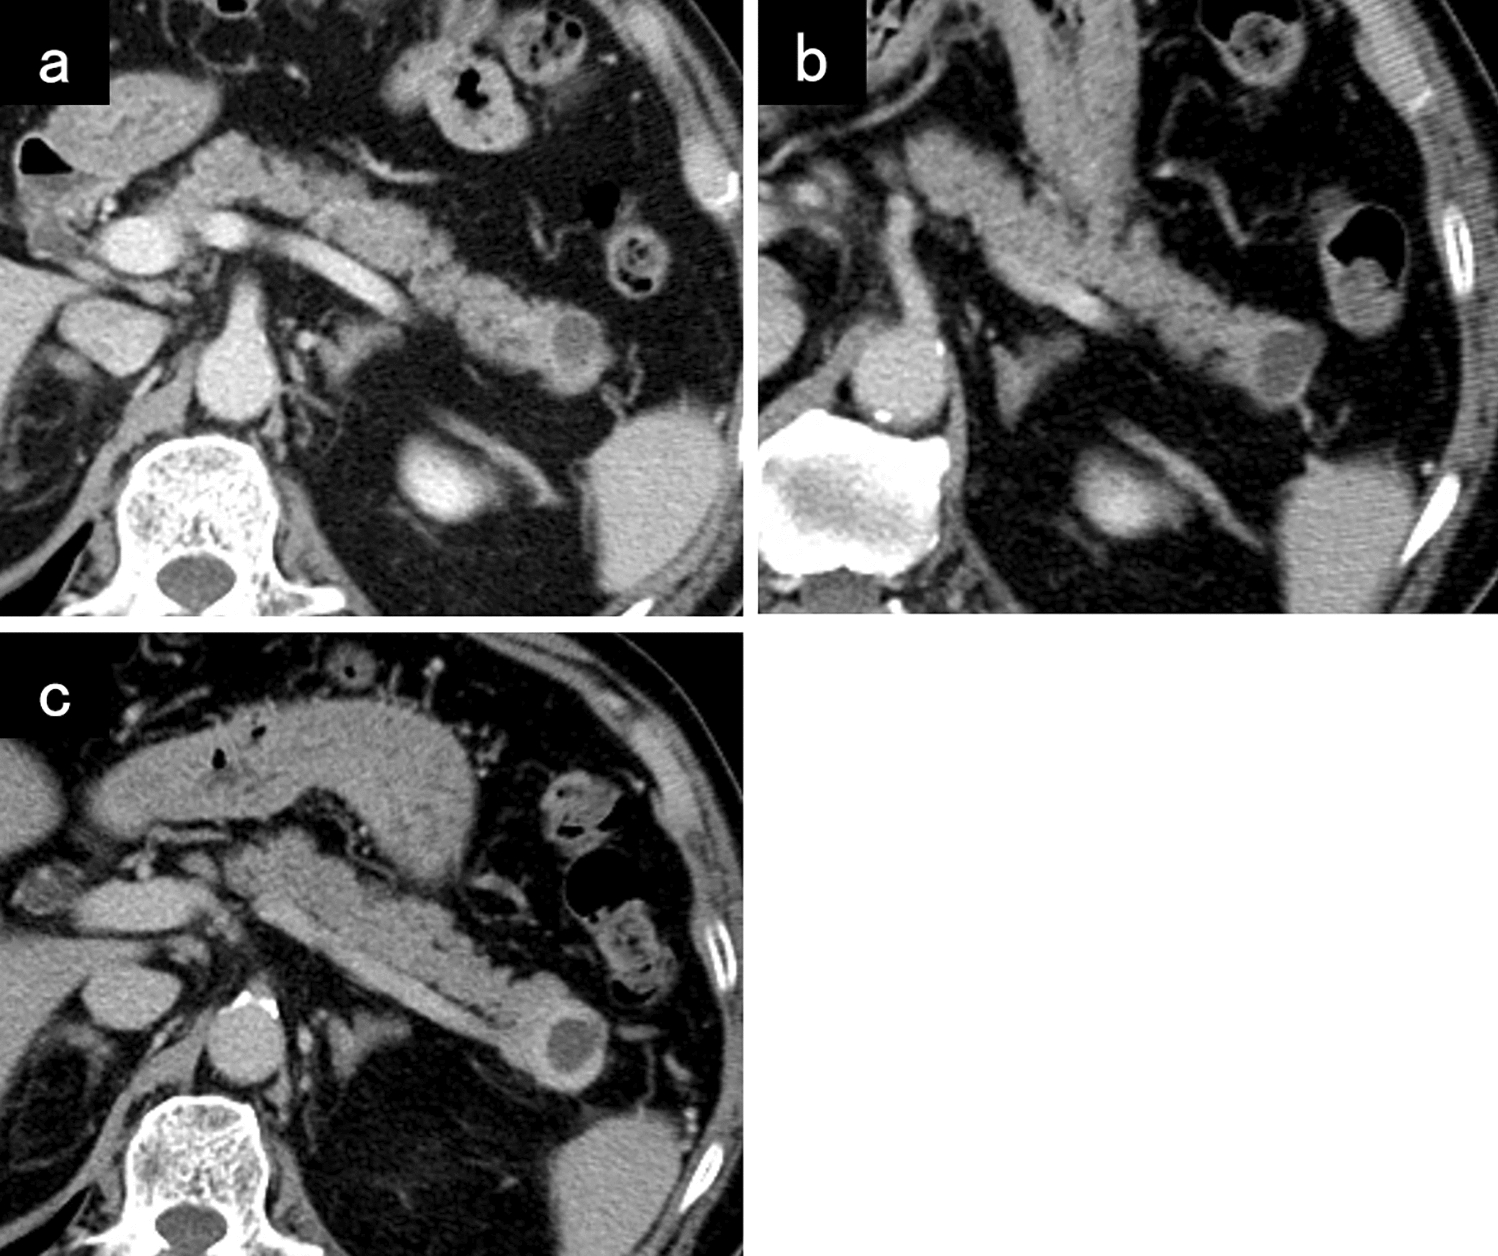 Investigating morphological changes in a simple mucinous cyst during the follow-up period: a case report